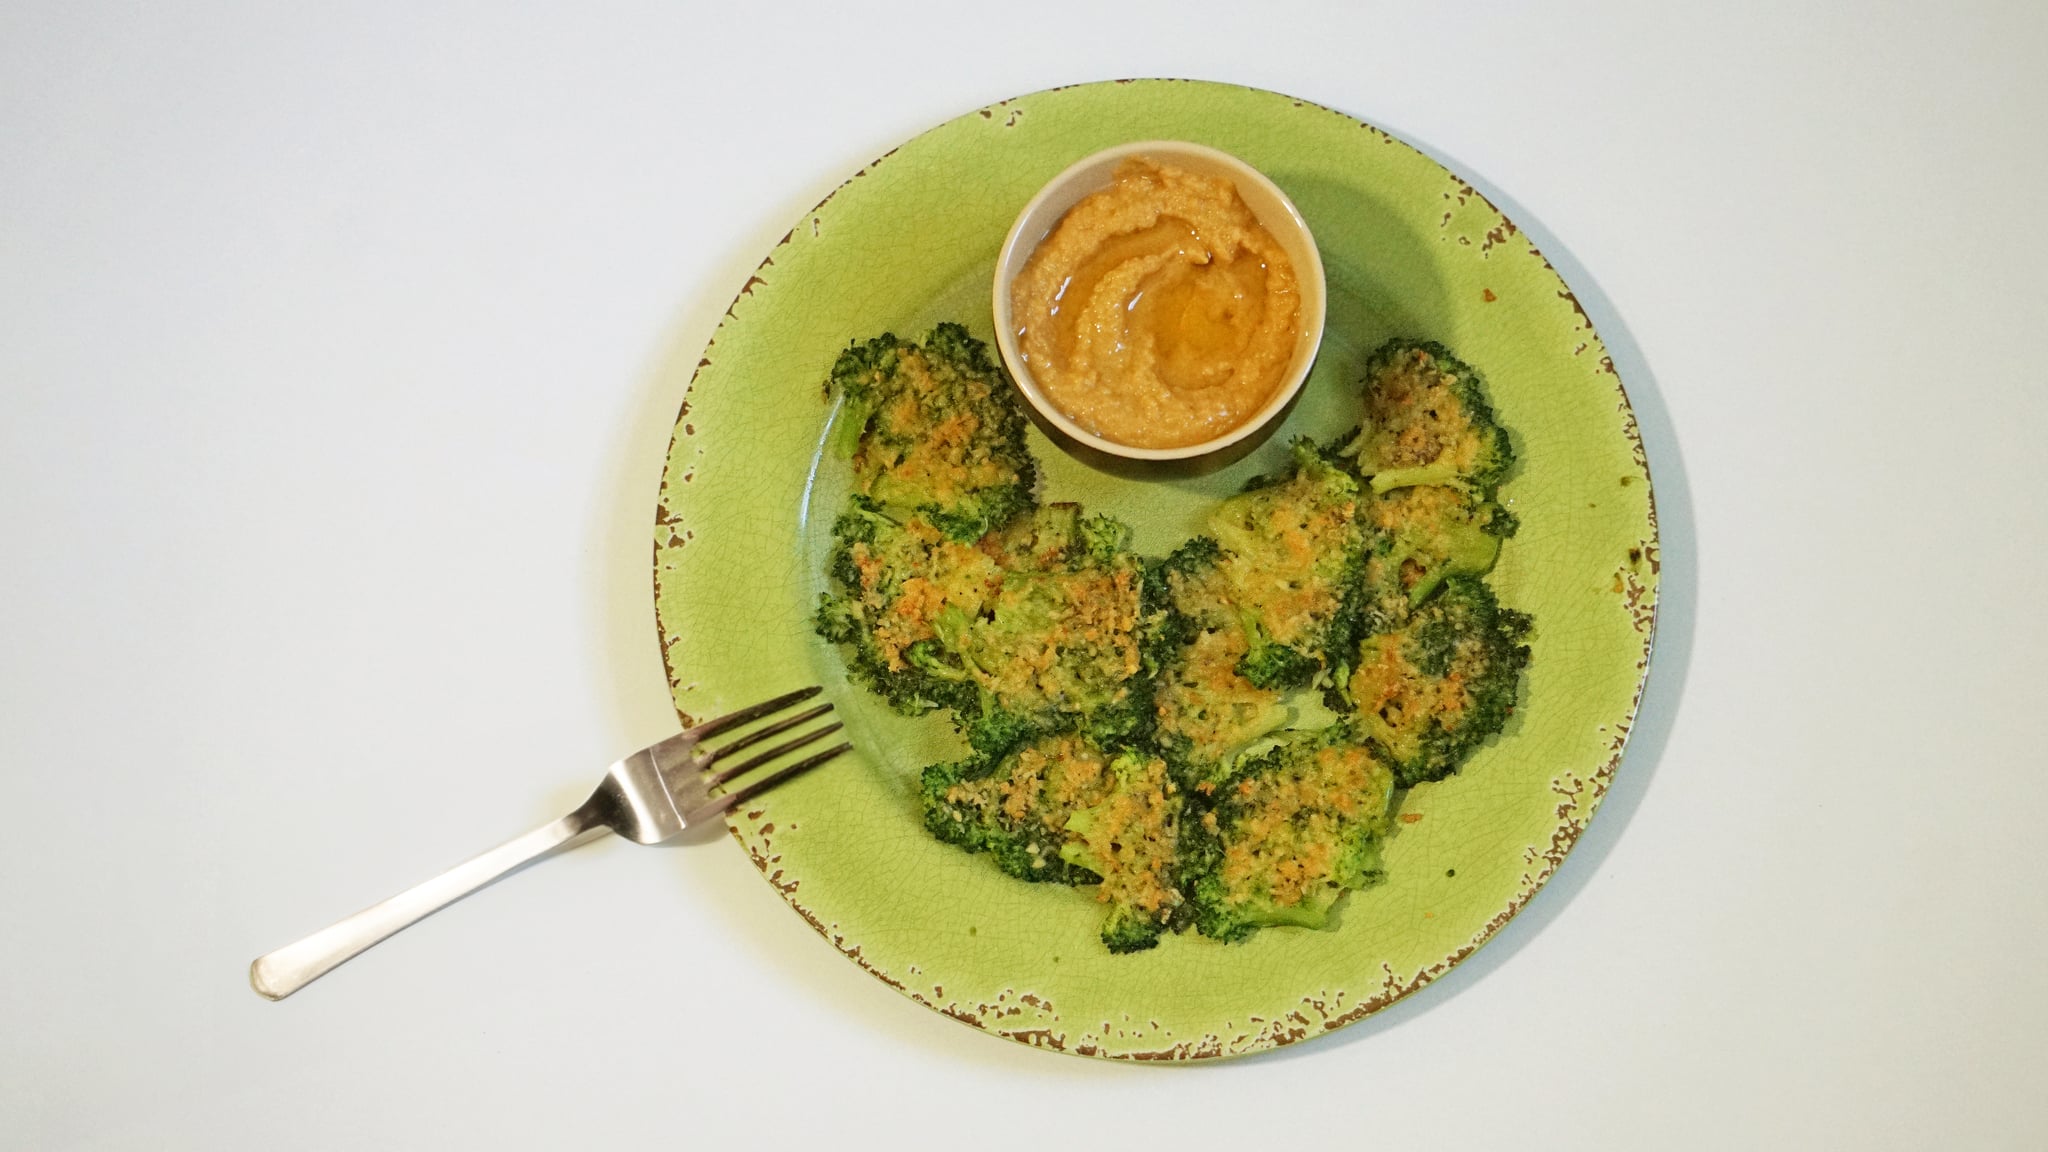 tiktok smashed broccoli recipe ingredients: finished product with dip